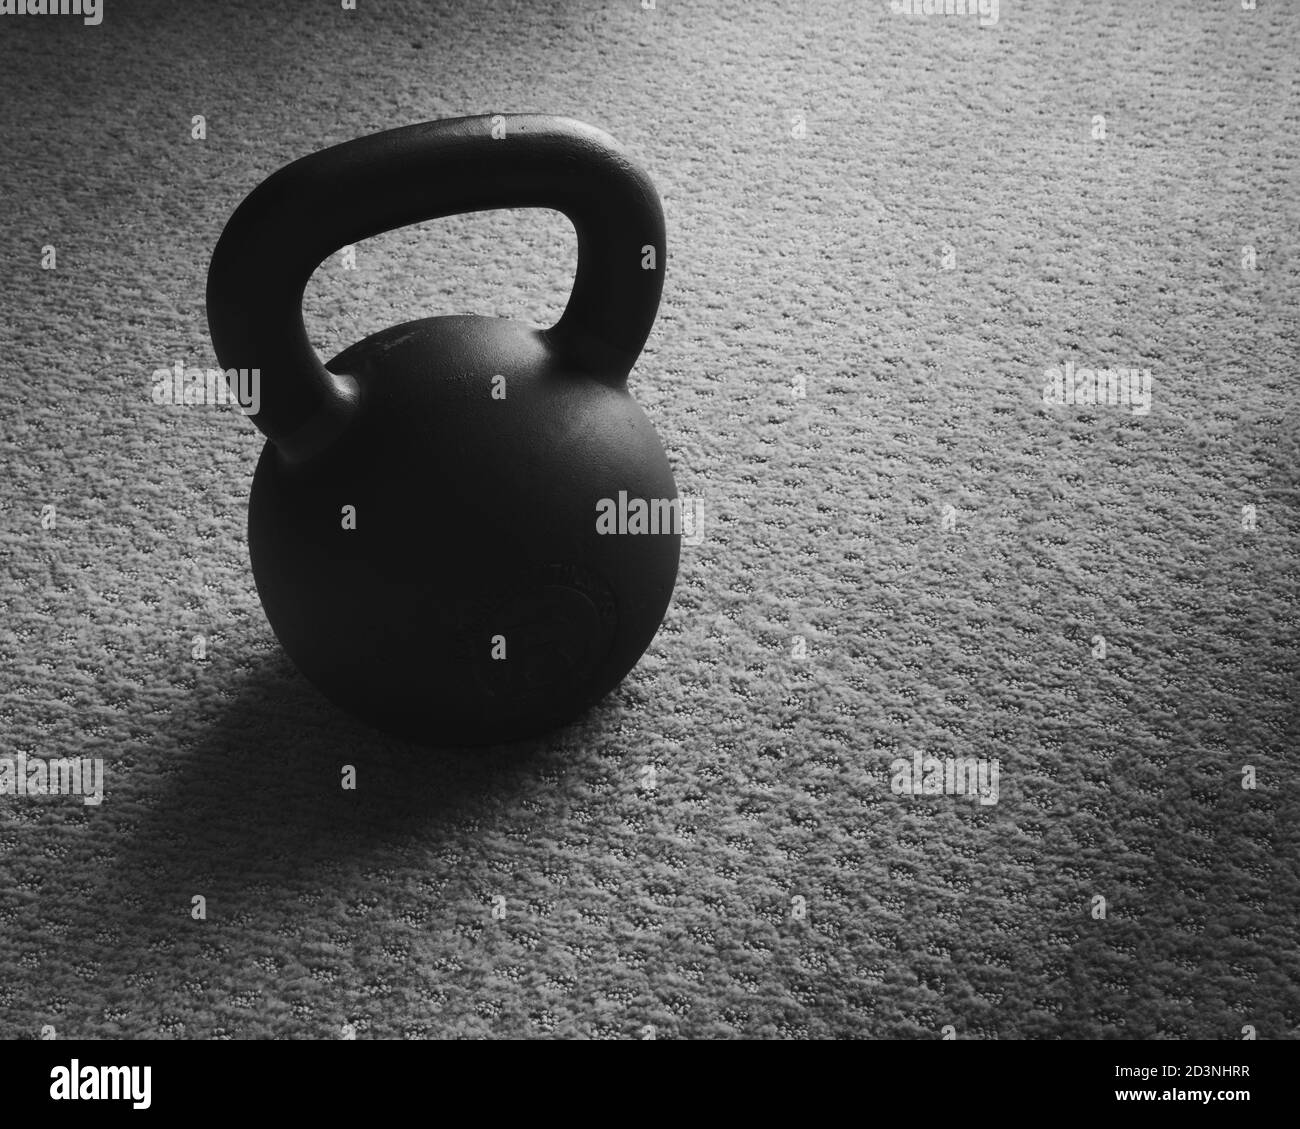 Minimal image of a classic kettlebell weight Stock Photo